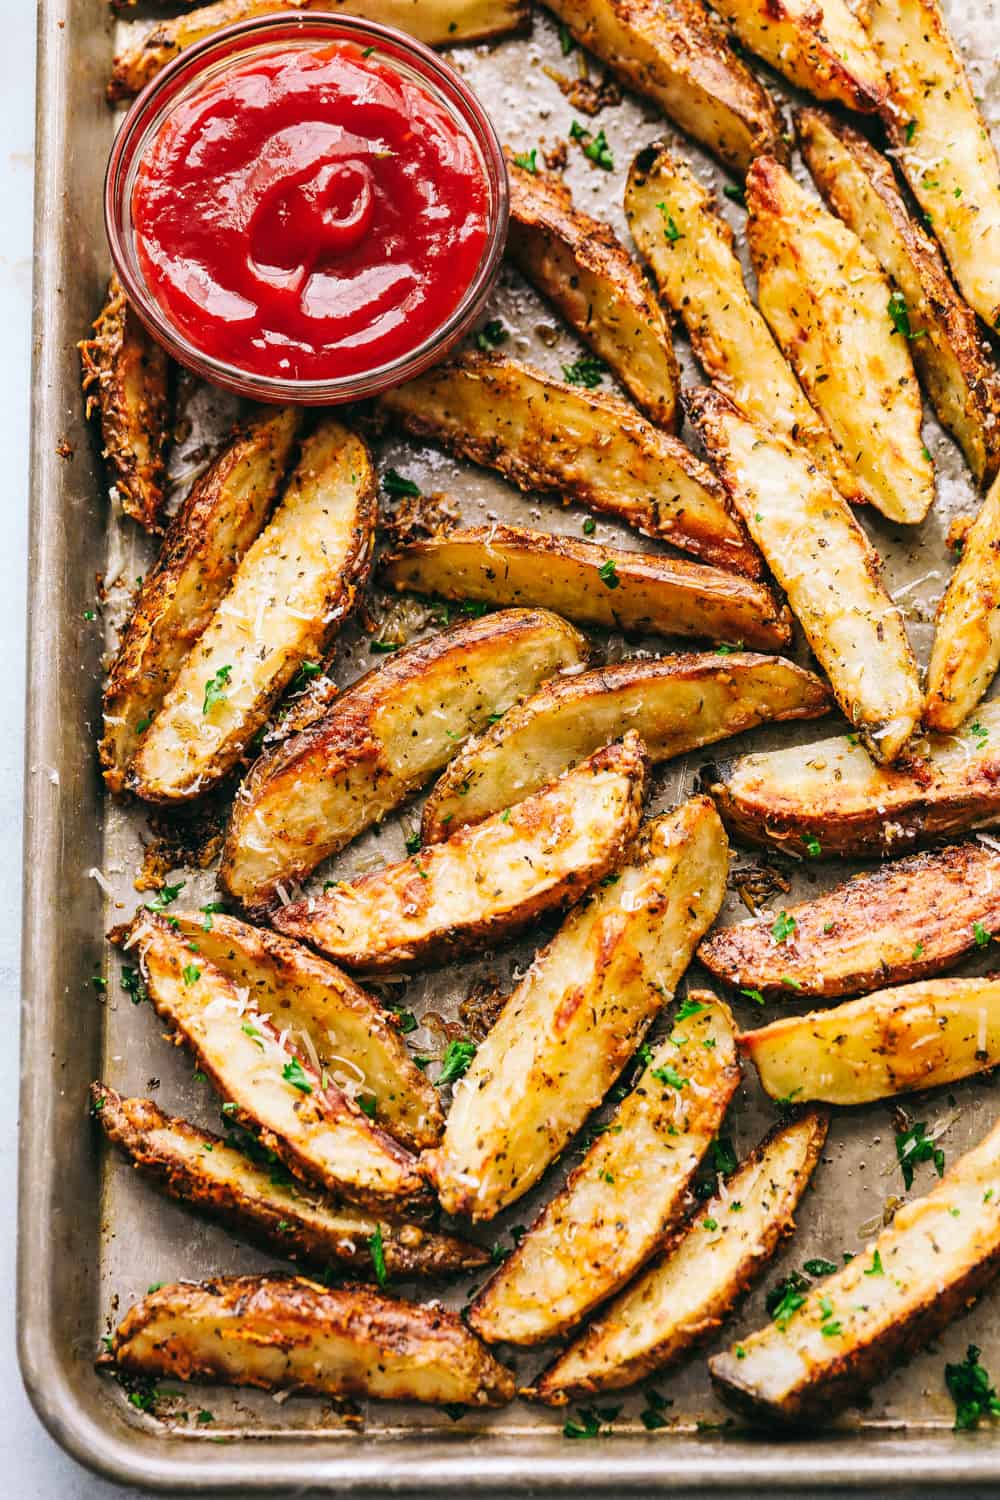 The cooked potato wedges on a baking sheet.